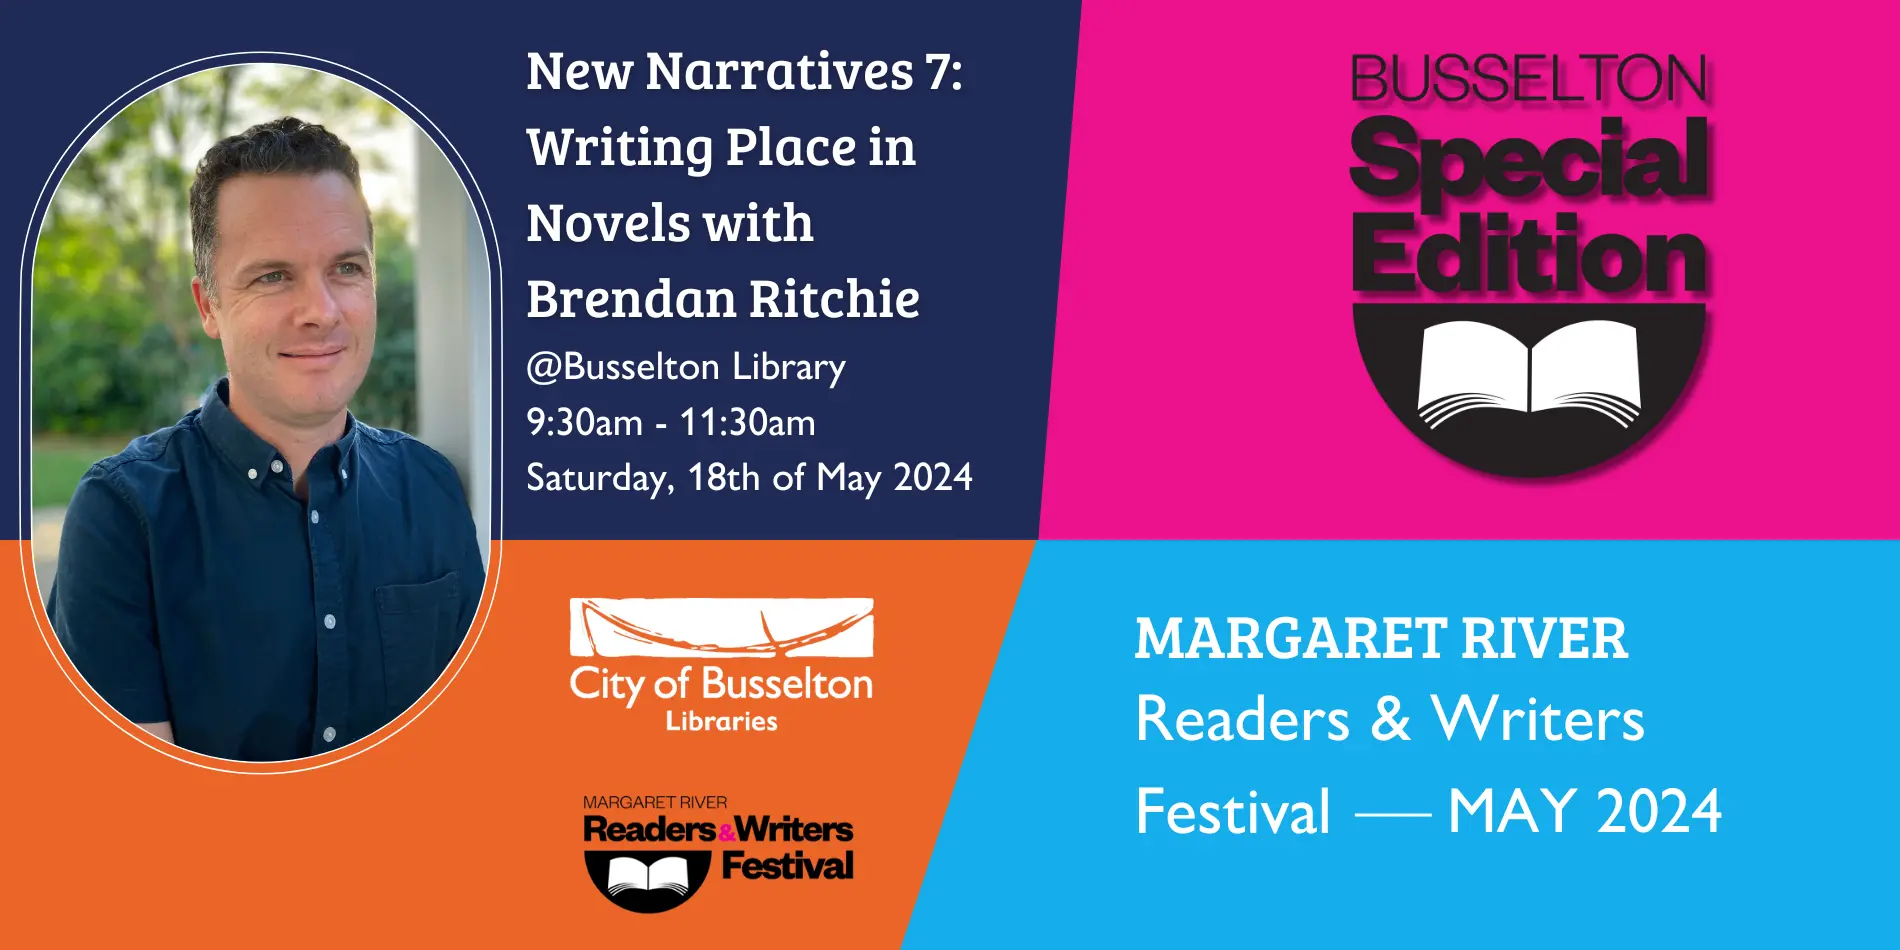 Brendan Ritchie, writing workshop to be held at the Busselton library on the 18th of May.